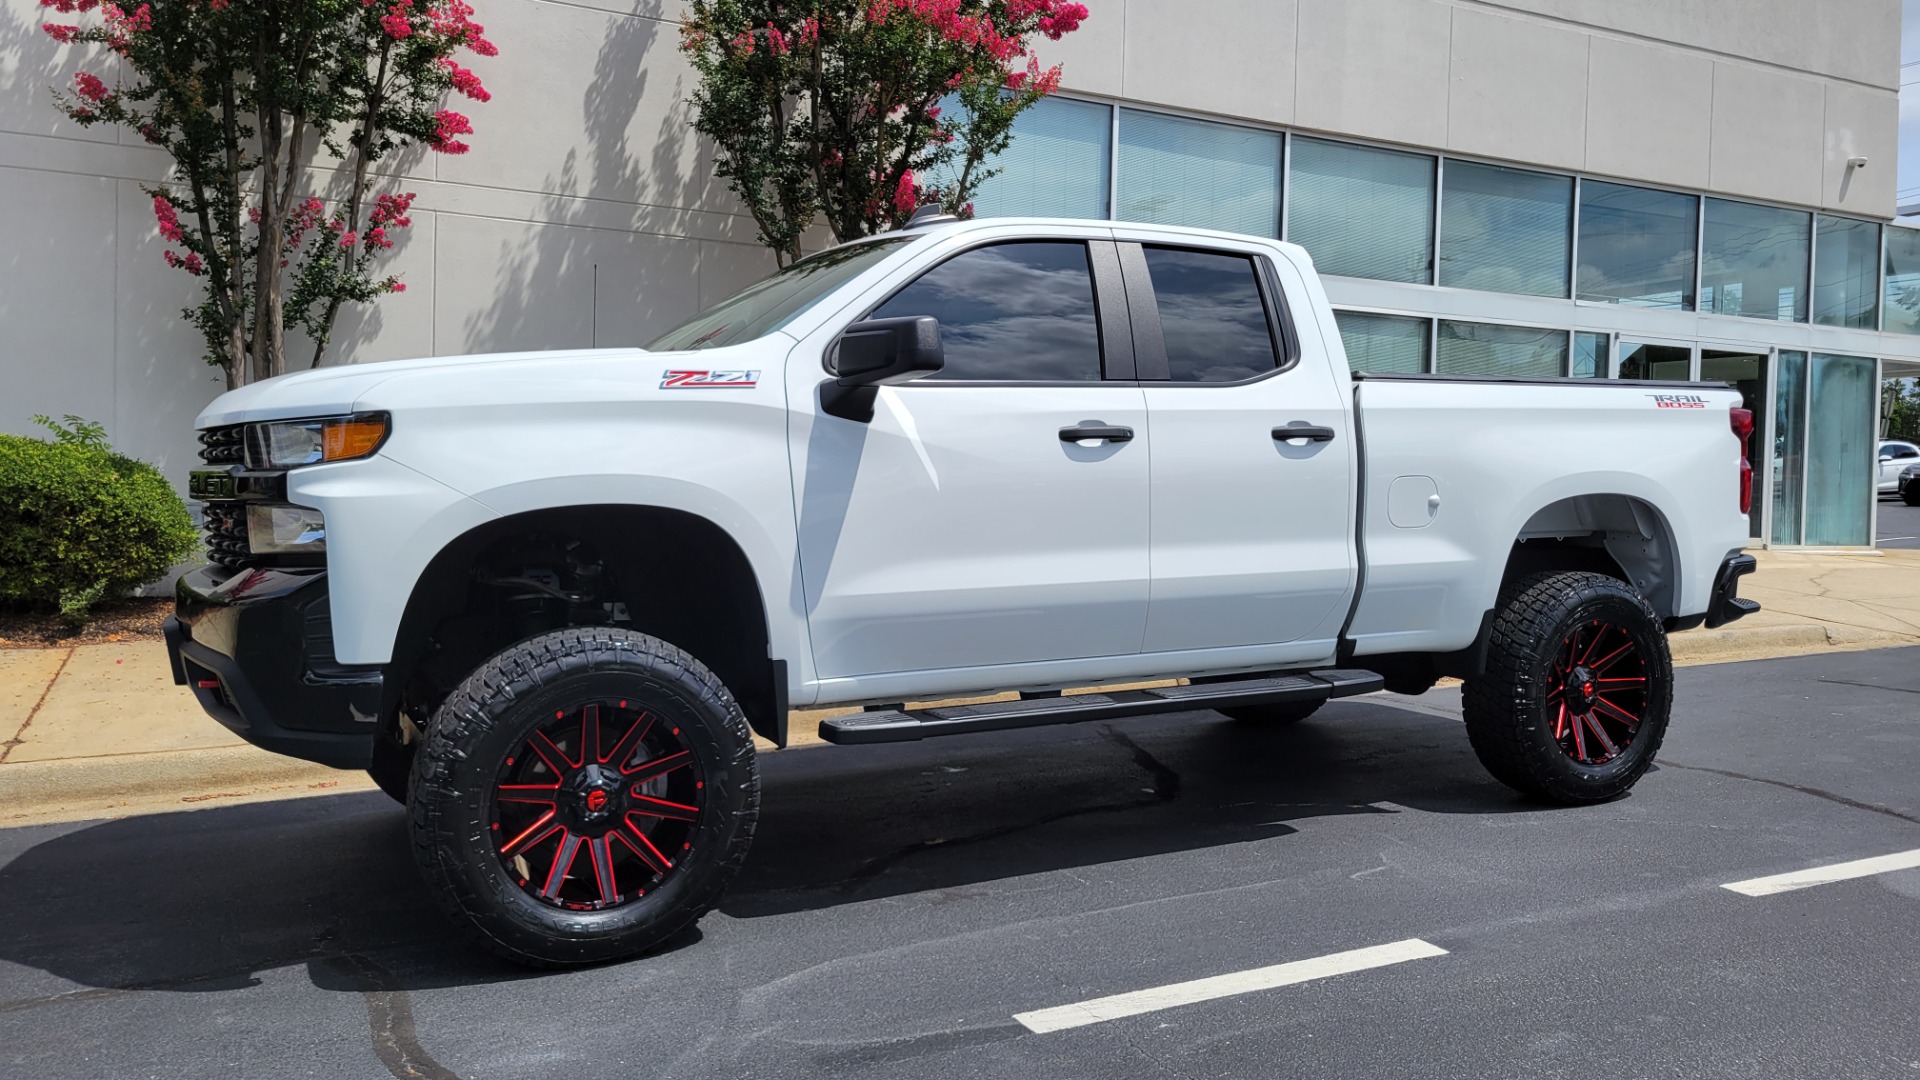 Used 2020 Chevrolet SILVERADO 1500 CUSTOM TRAIL BOSS 4X4 5.3L / REMOTE START / WIFI / REARVIEW for sale $42,995 at Formula Imports in Charlotte NC 28227 1